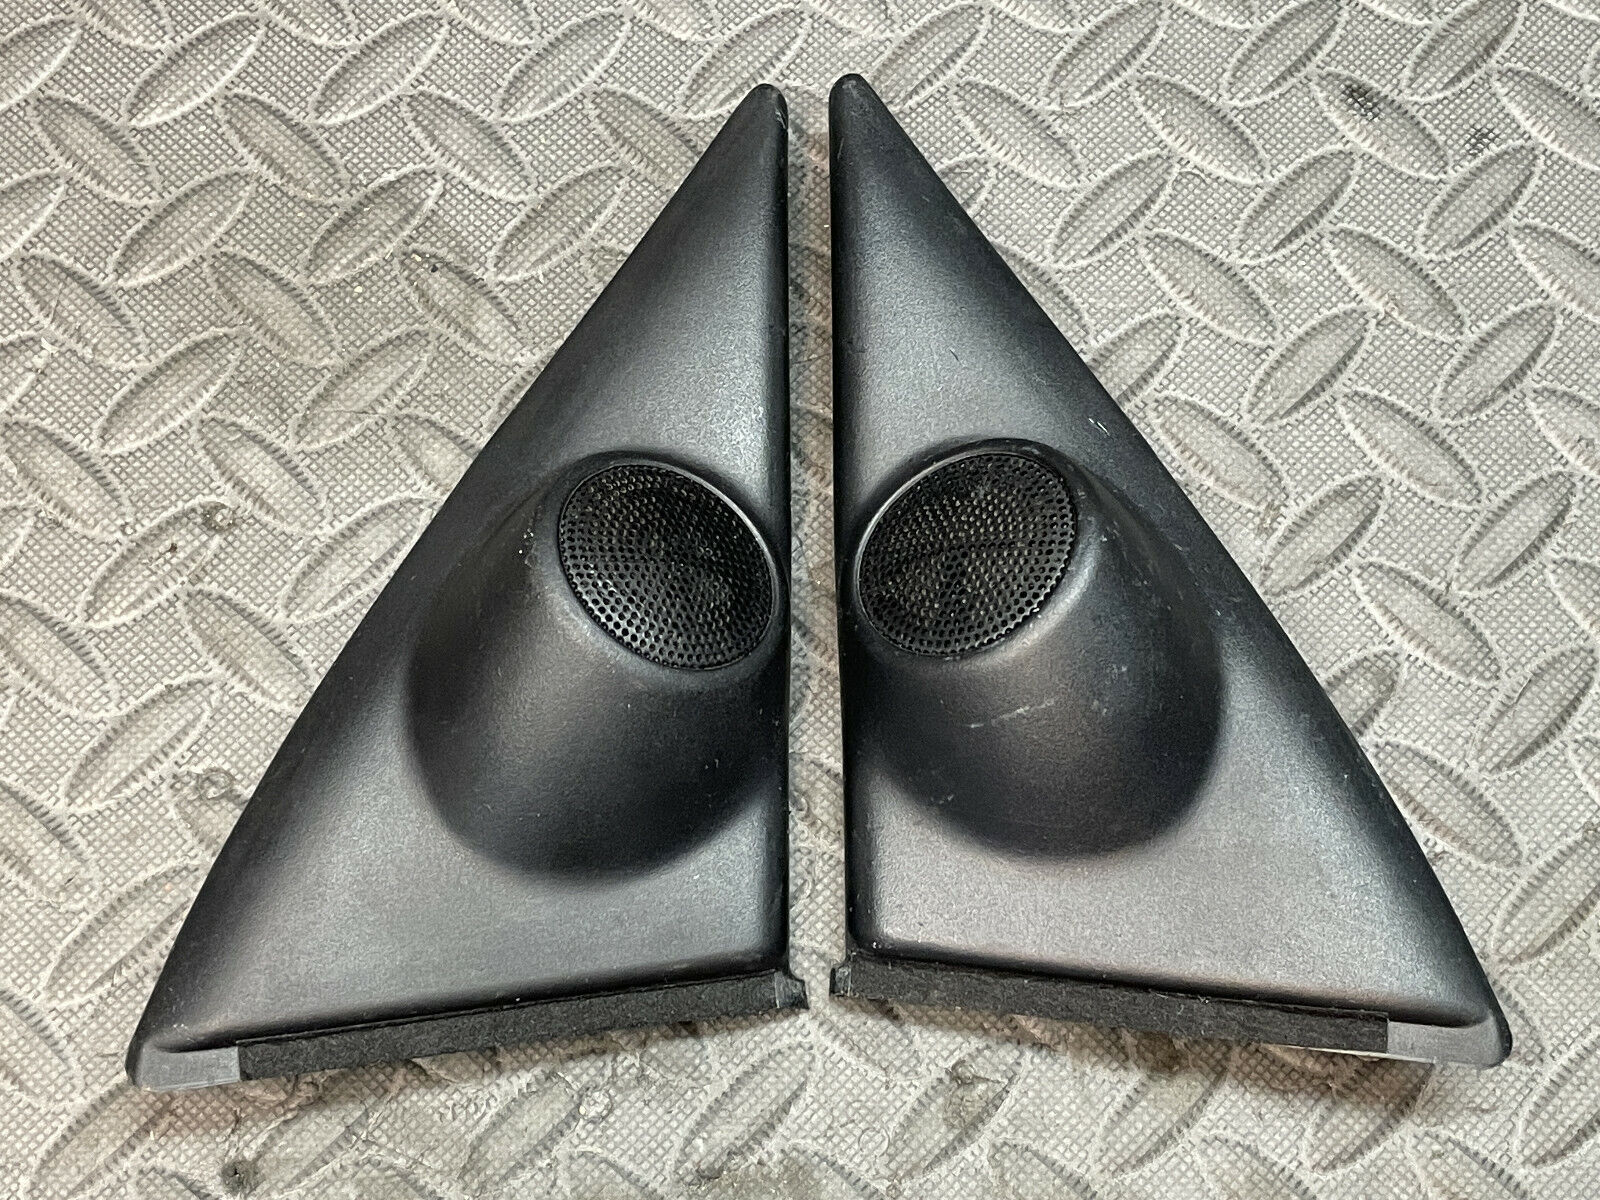 Toyota 4Runner Tacoma Pickup Truck OFFicial Colorado Springs Mall TWEETER COVER PANEL Door CAP